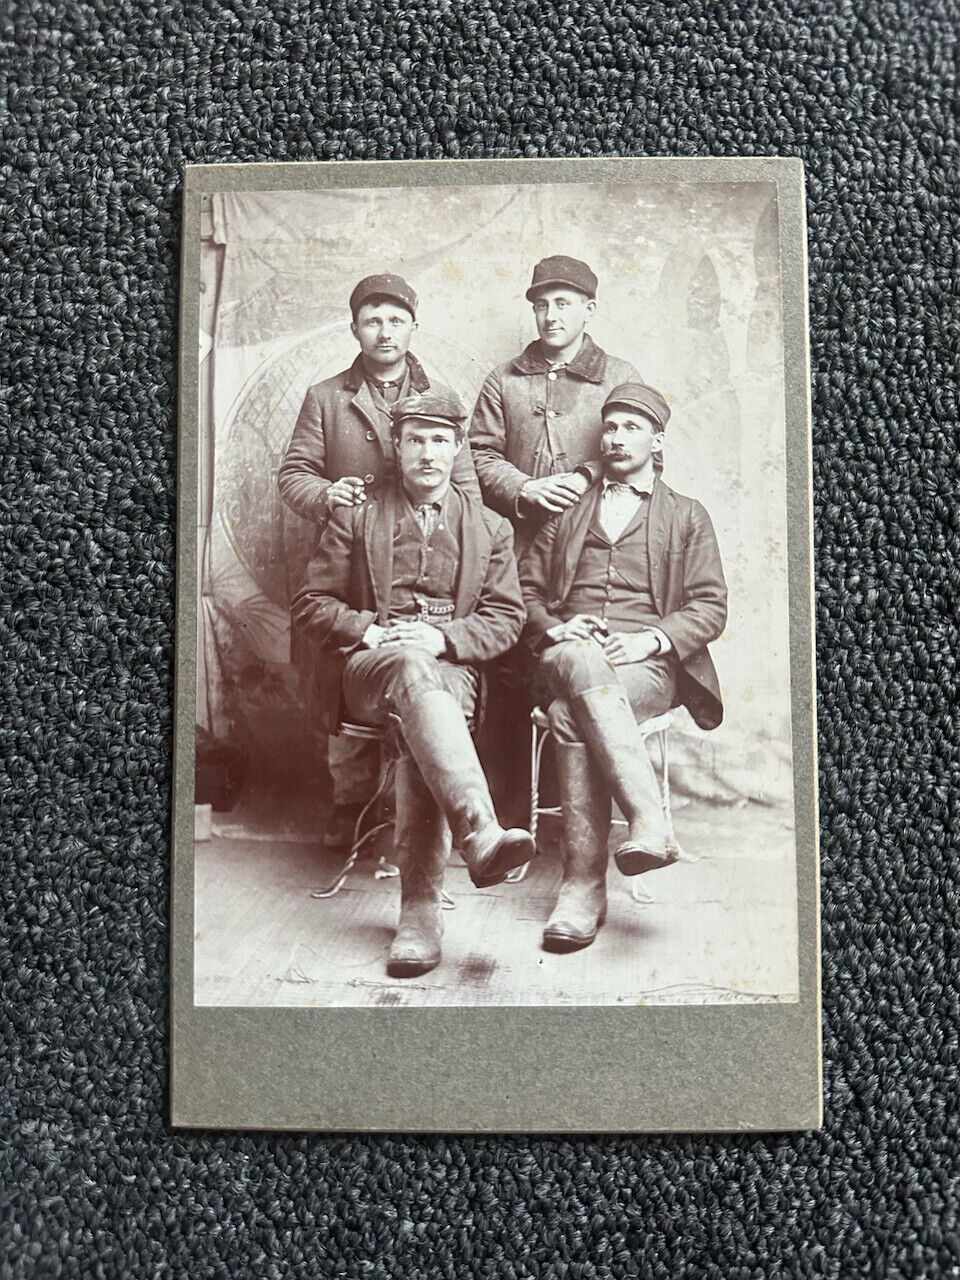 Antique Mounted Photo Cabinet Card Occupational Handsome Hardworking Men Gay int